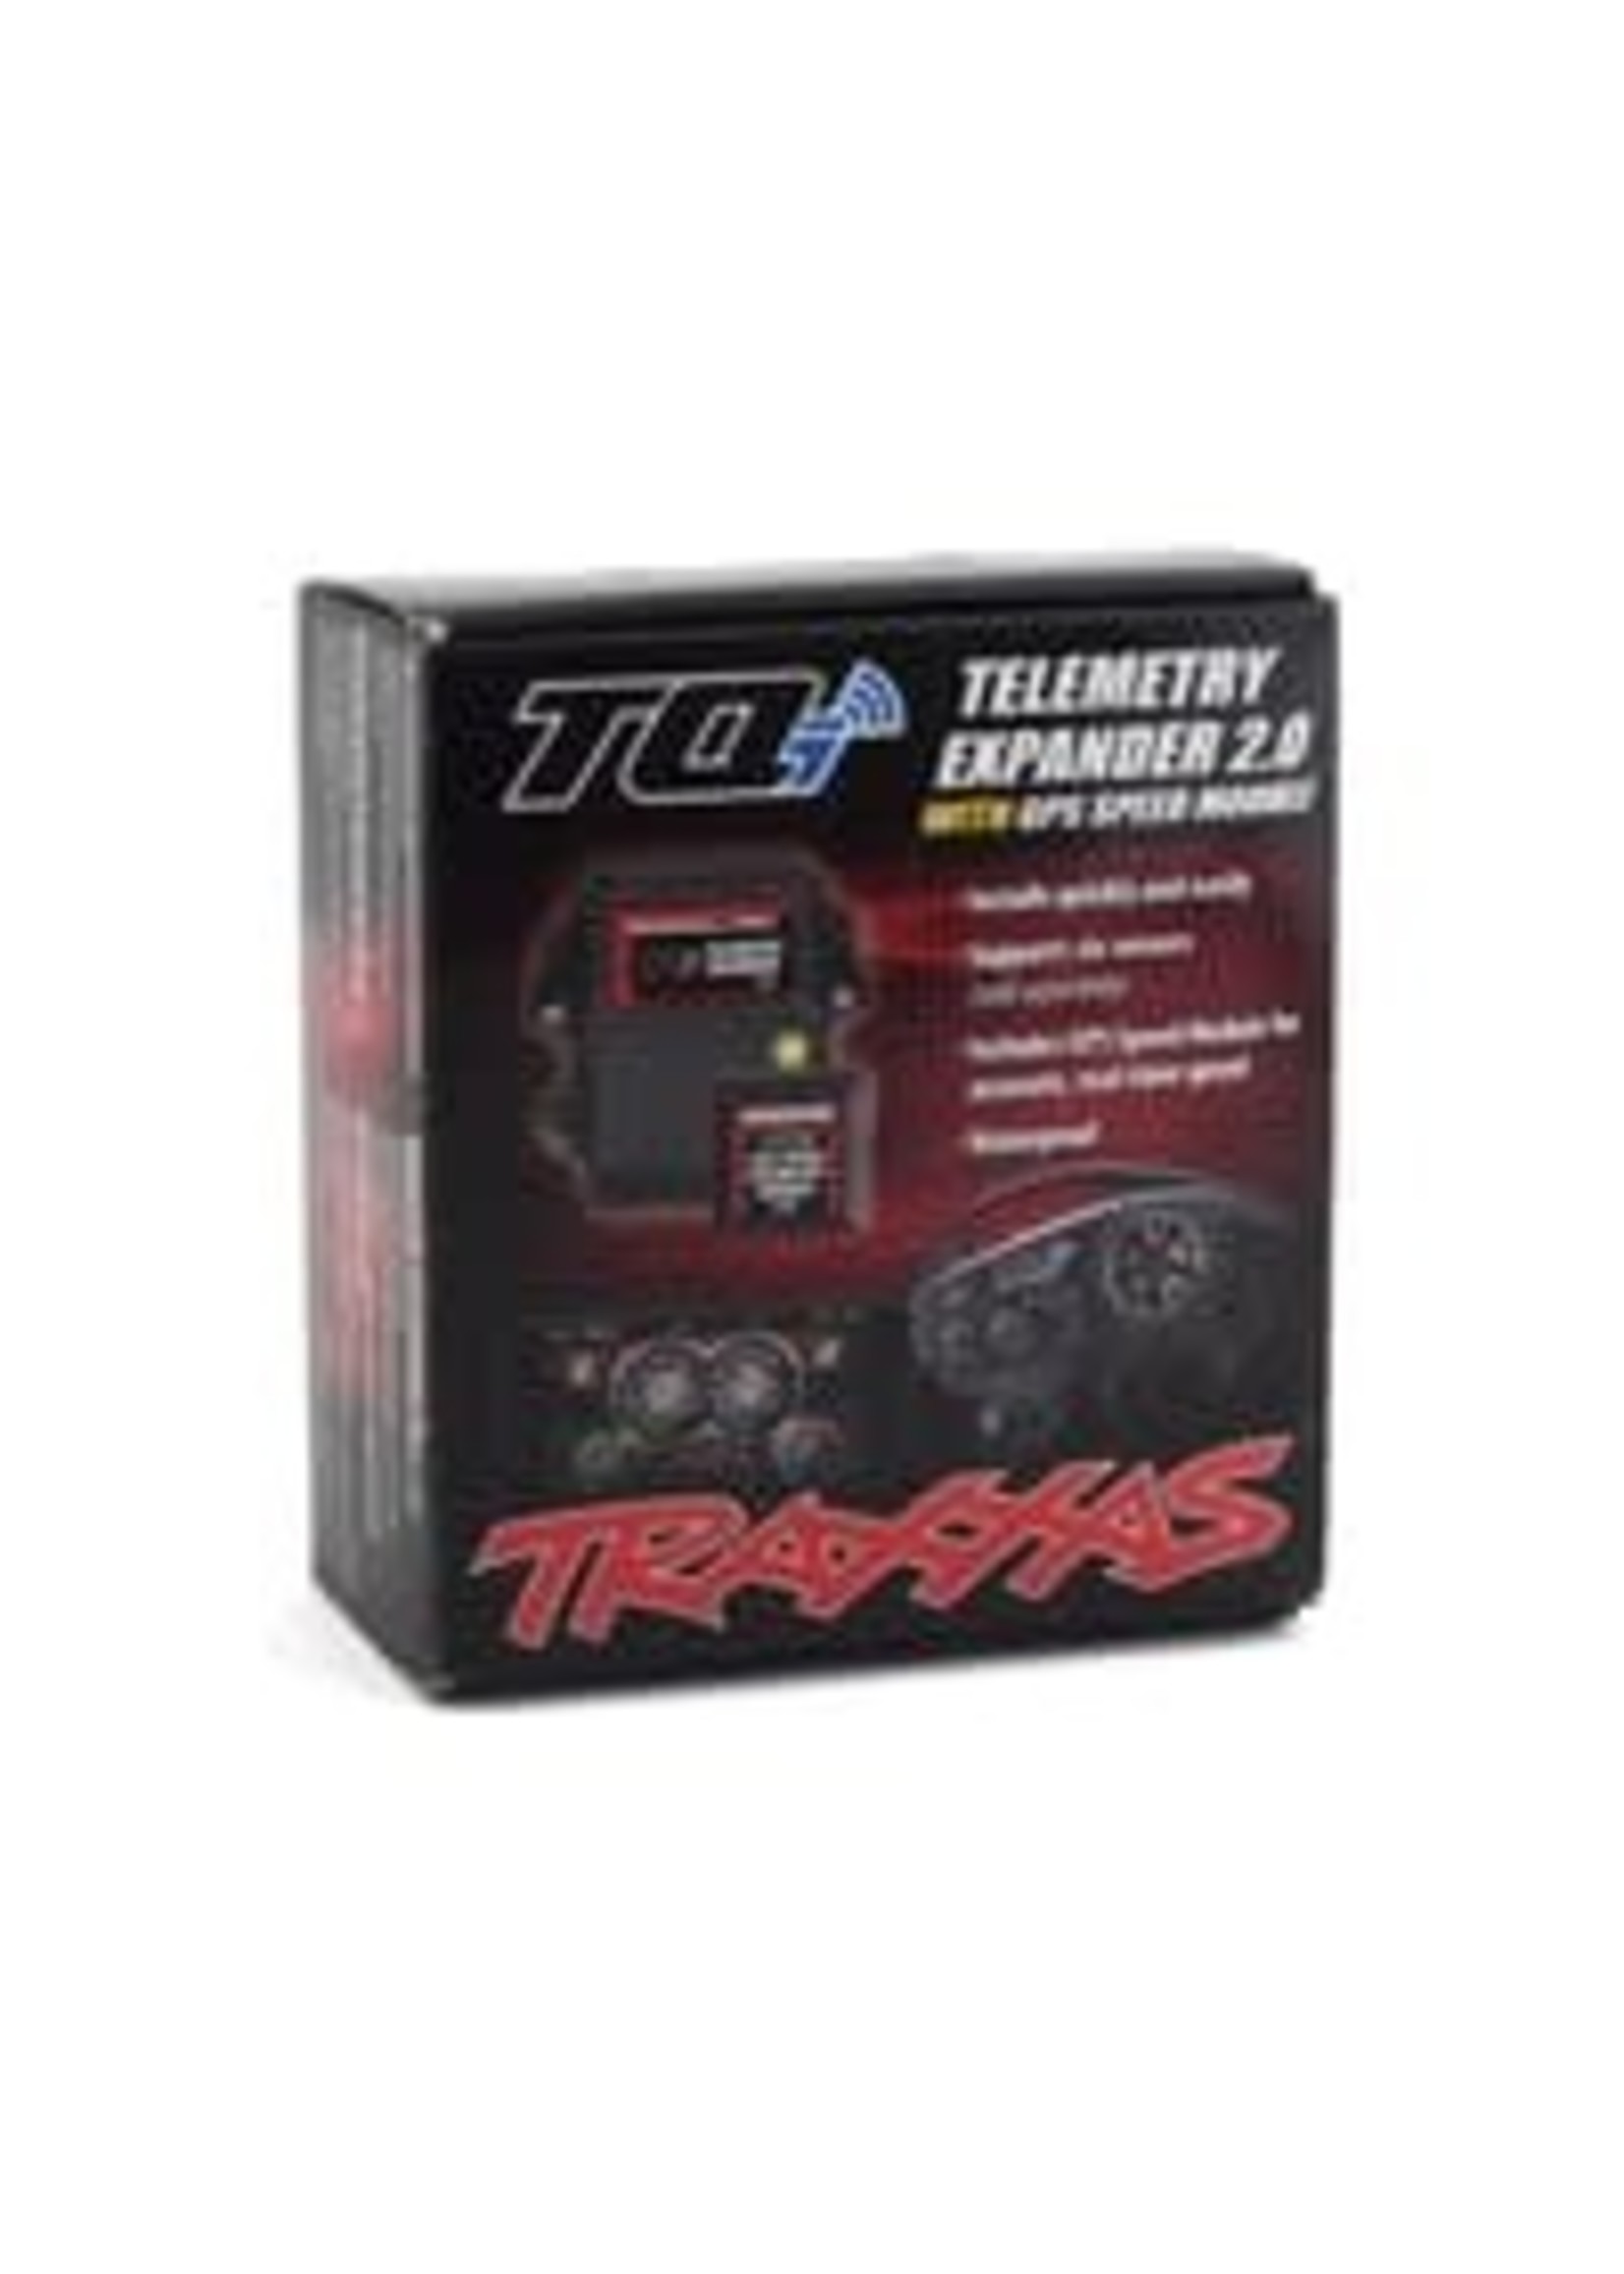 Traxxas 6553X Telemetry expander 2.0 and GPS module 2.0, TQi radio system